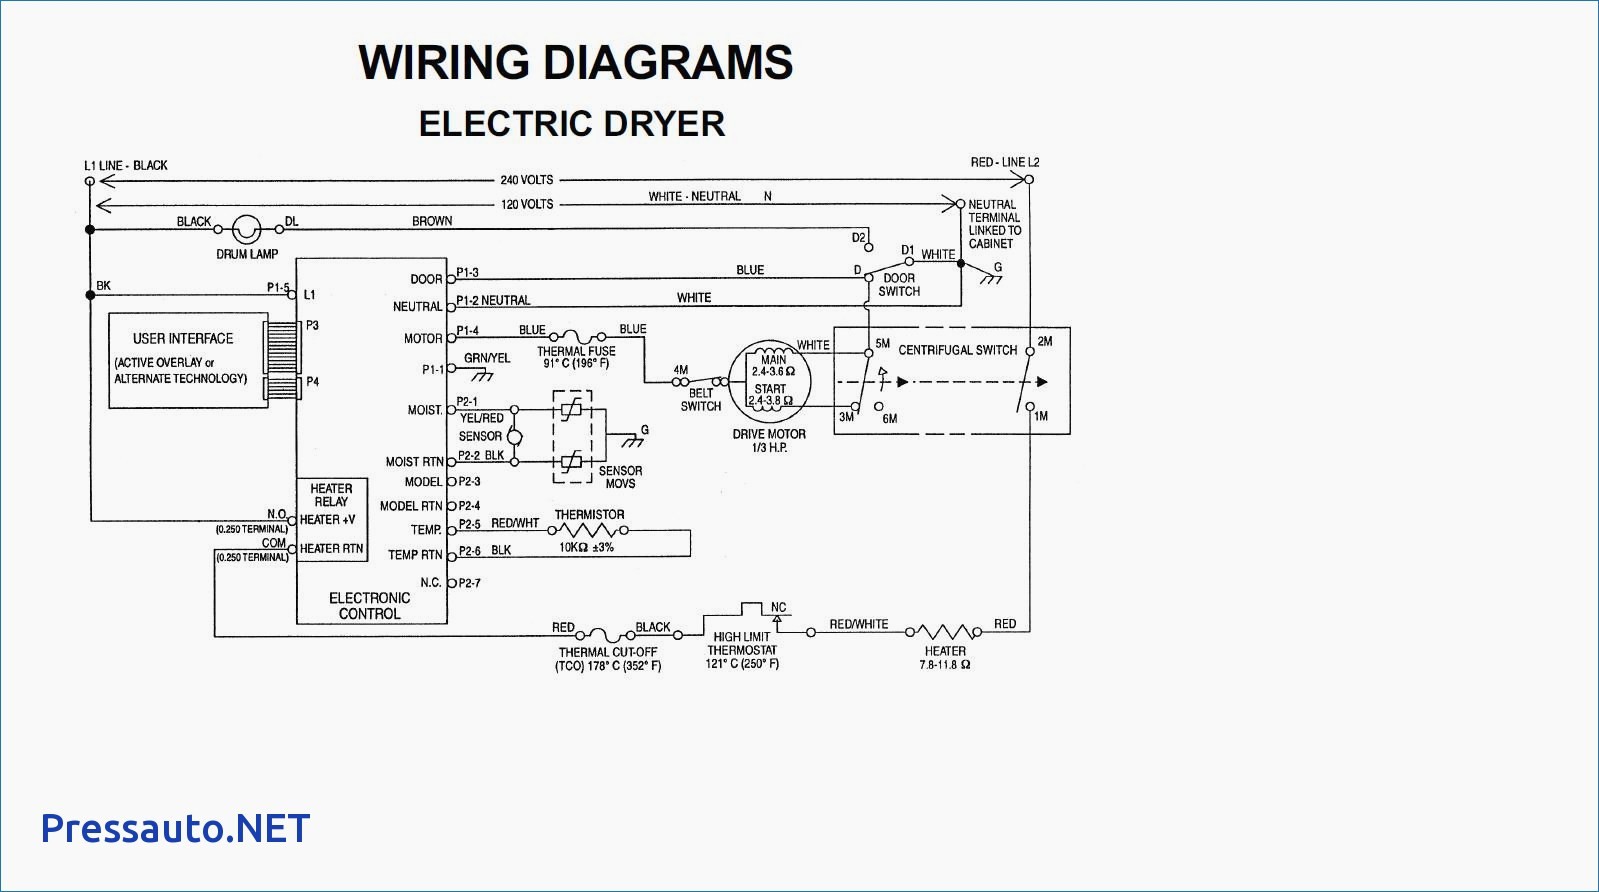 Amana Dryer Wiring Diagram Collection Pretty Ge Dryer Wiring Diagram line Gallery Electrical Circuit Lovely